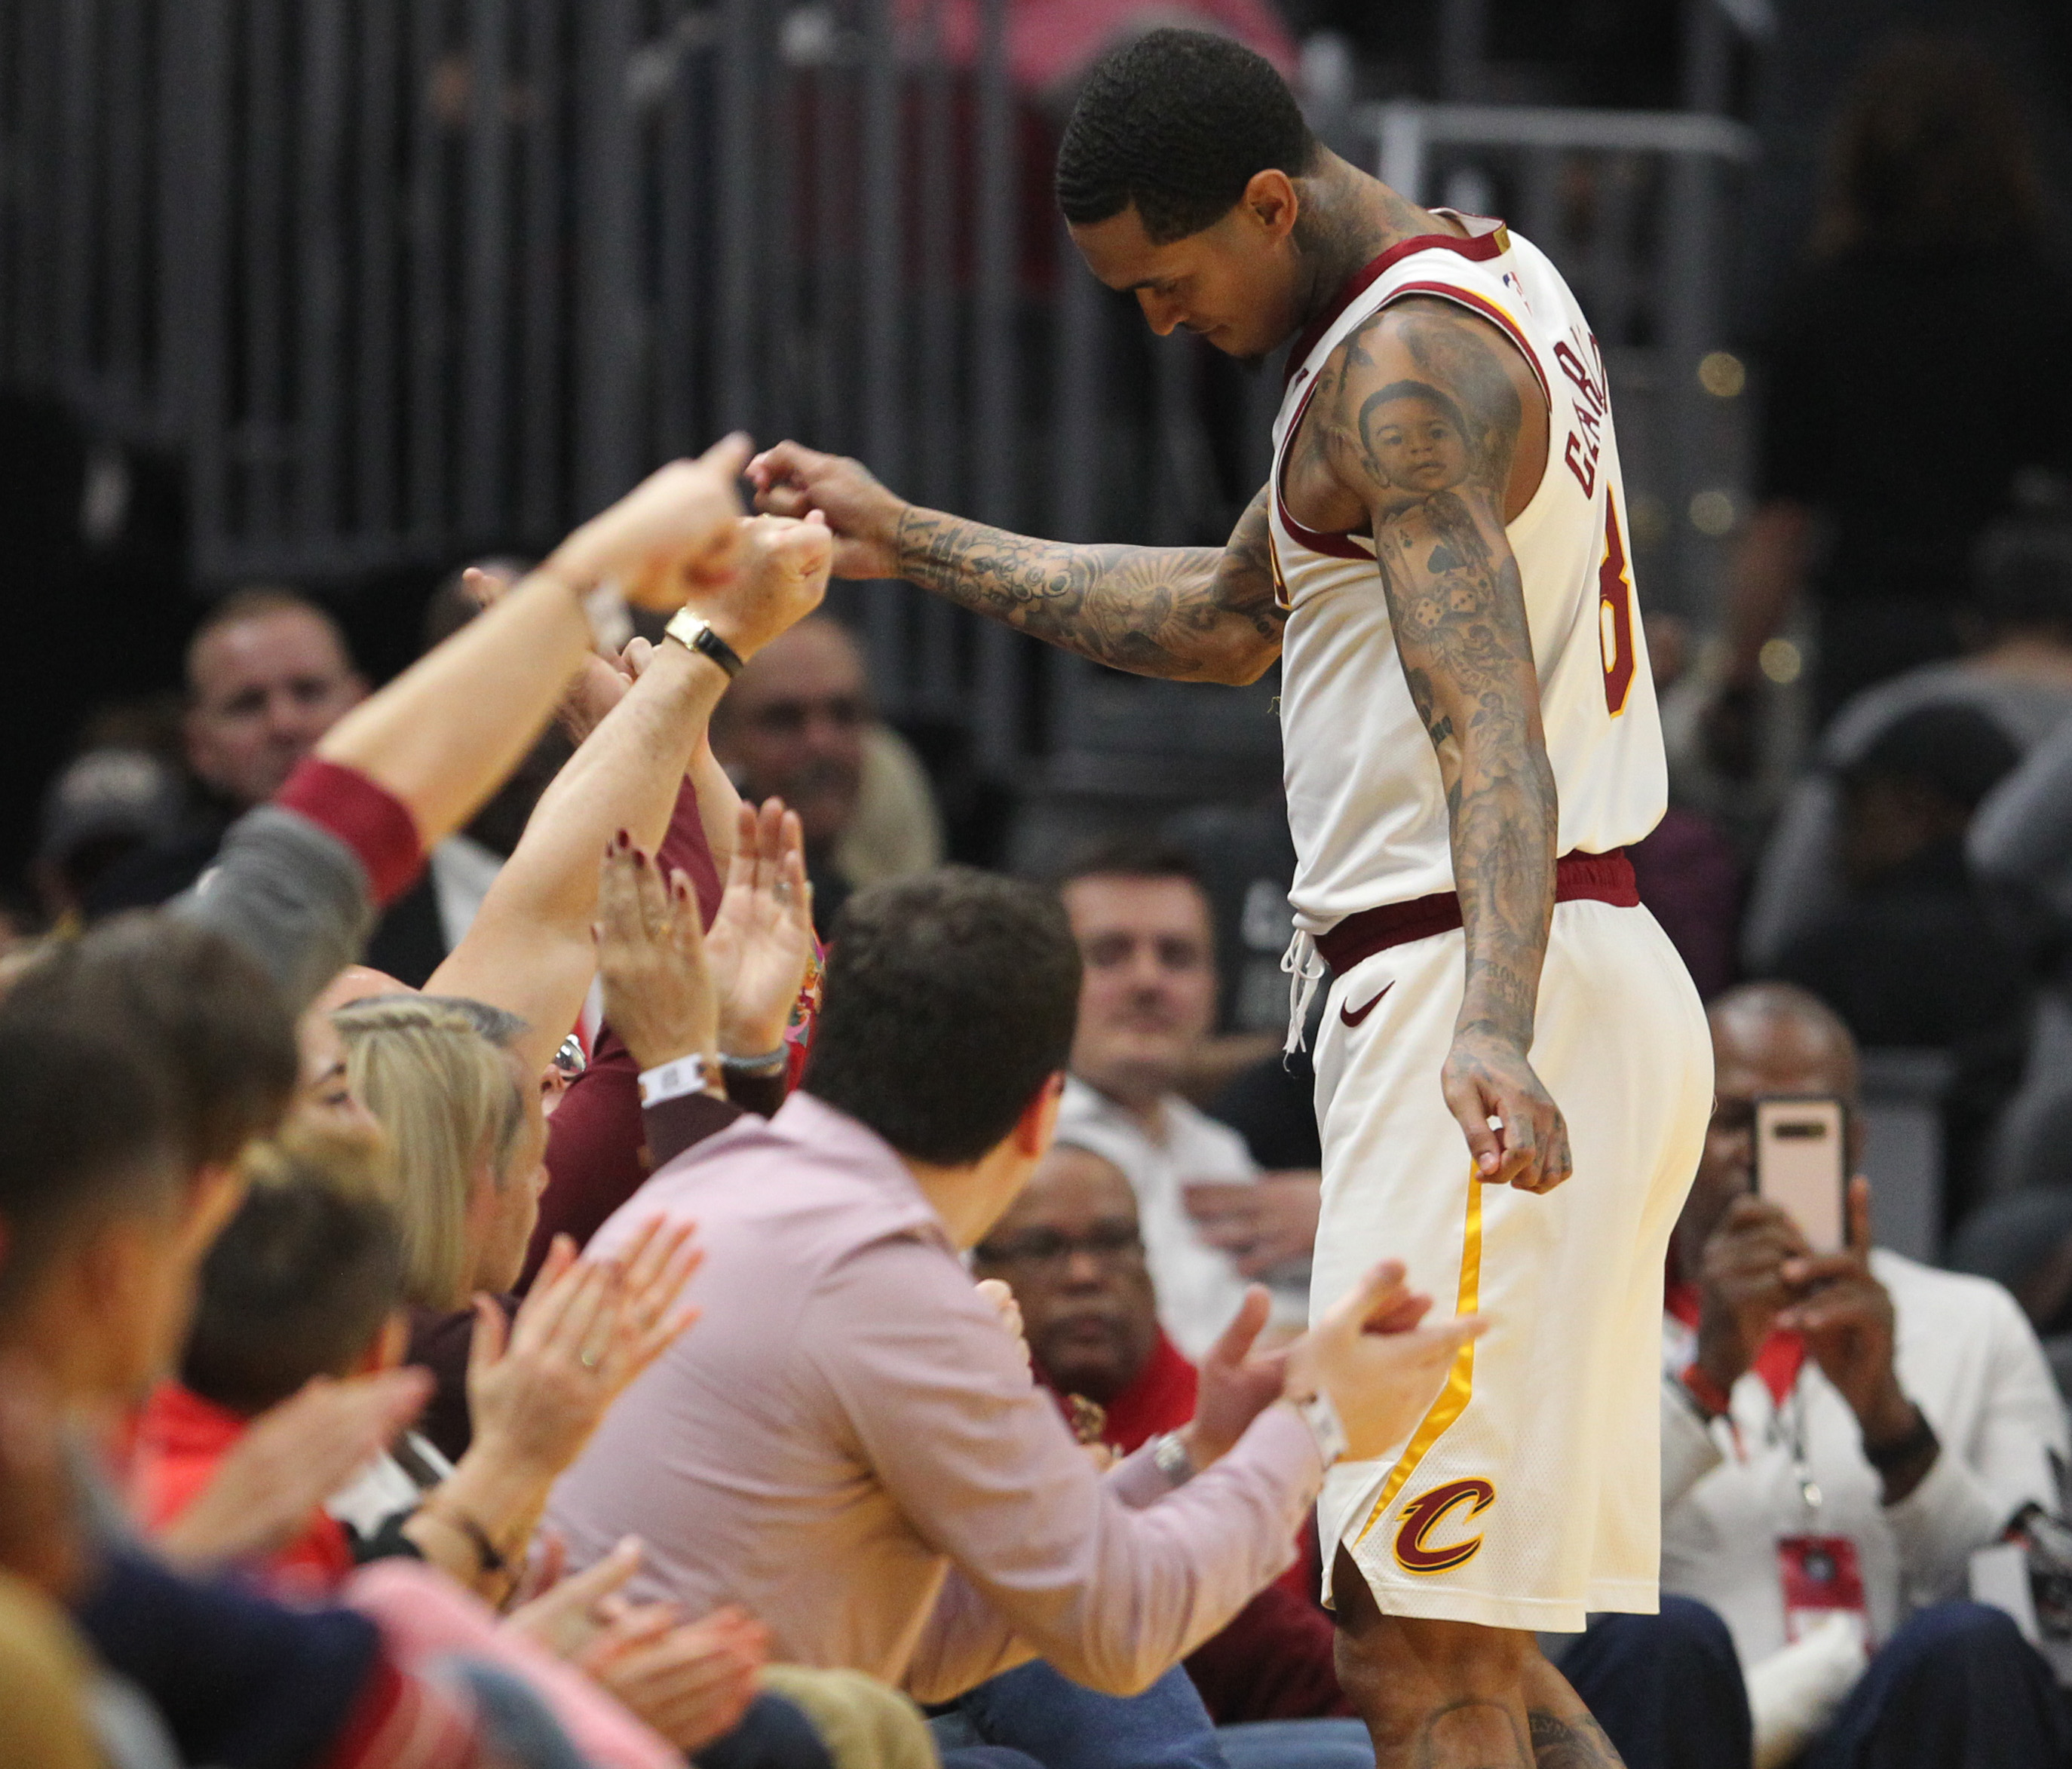 With Cavs Set To Wear Home White, Fans At The Q Will Look To